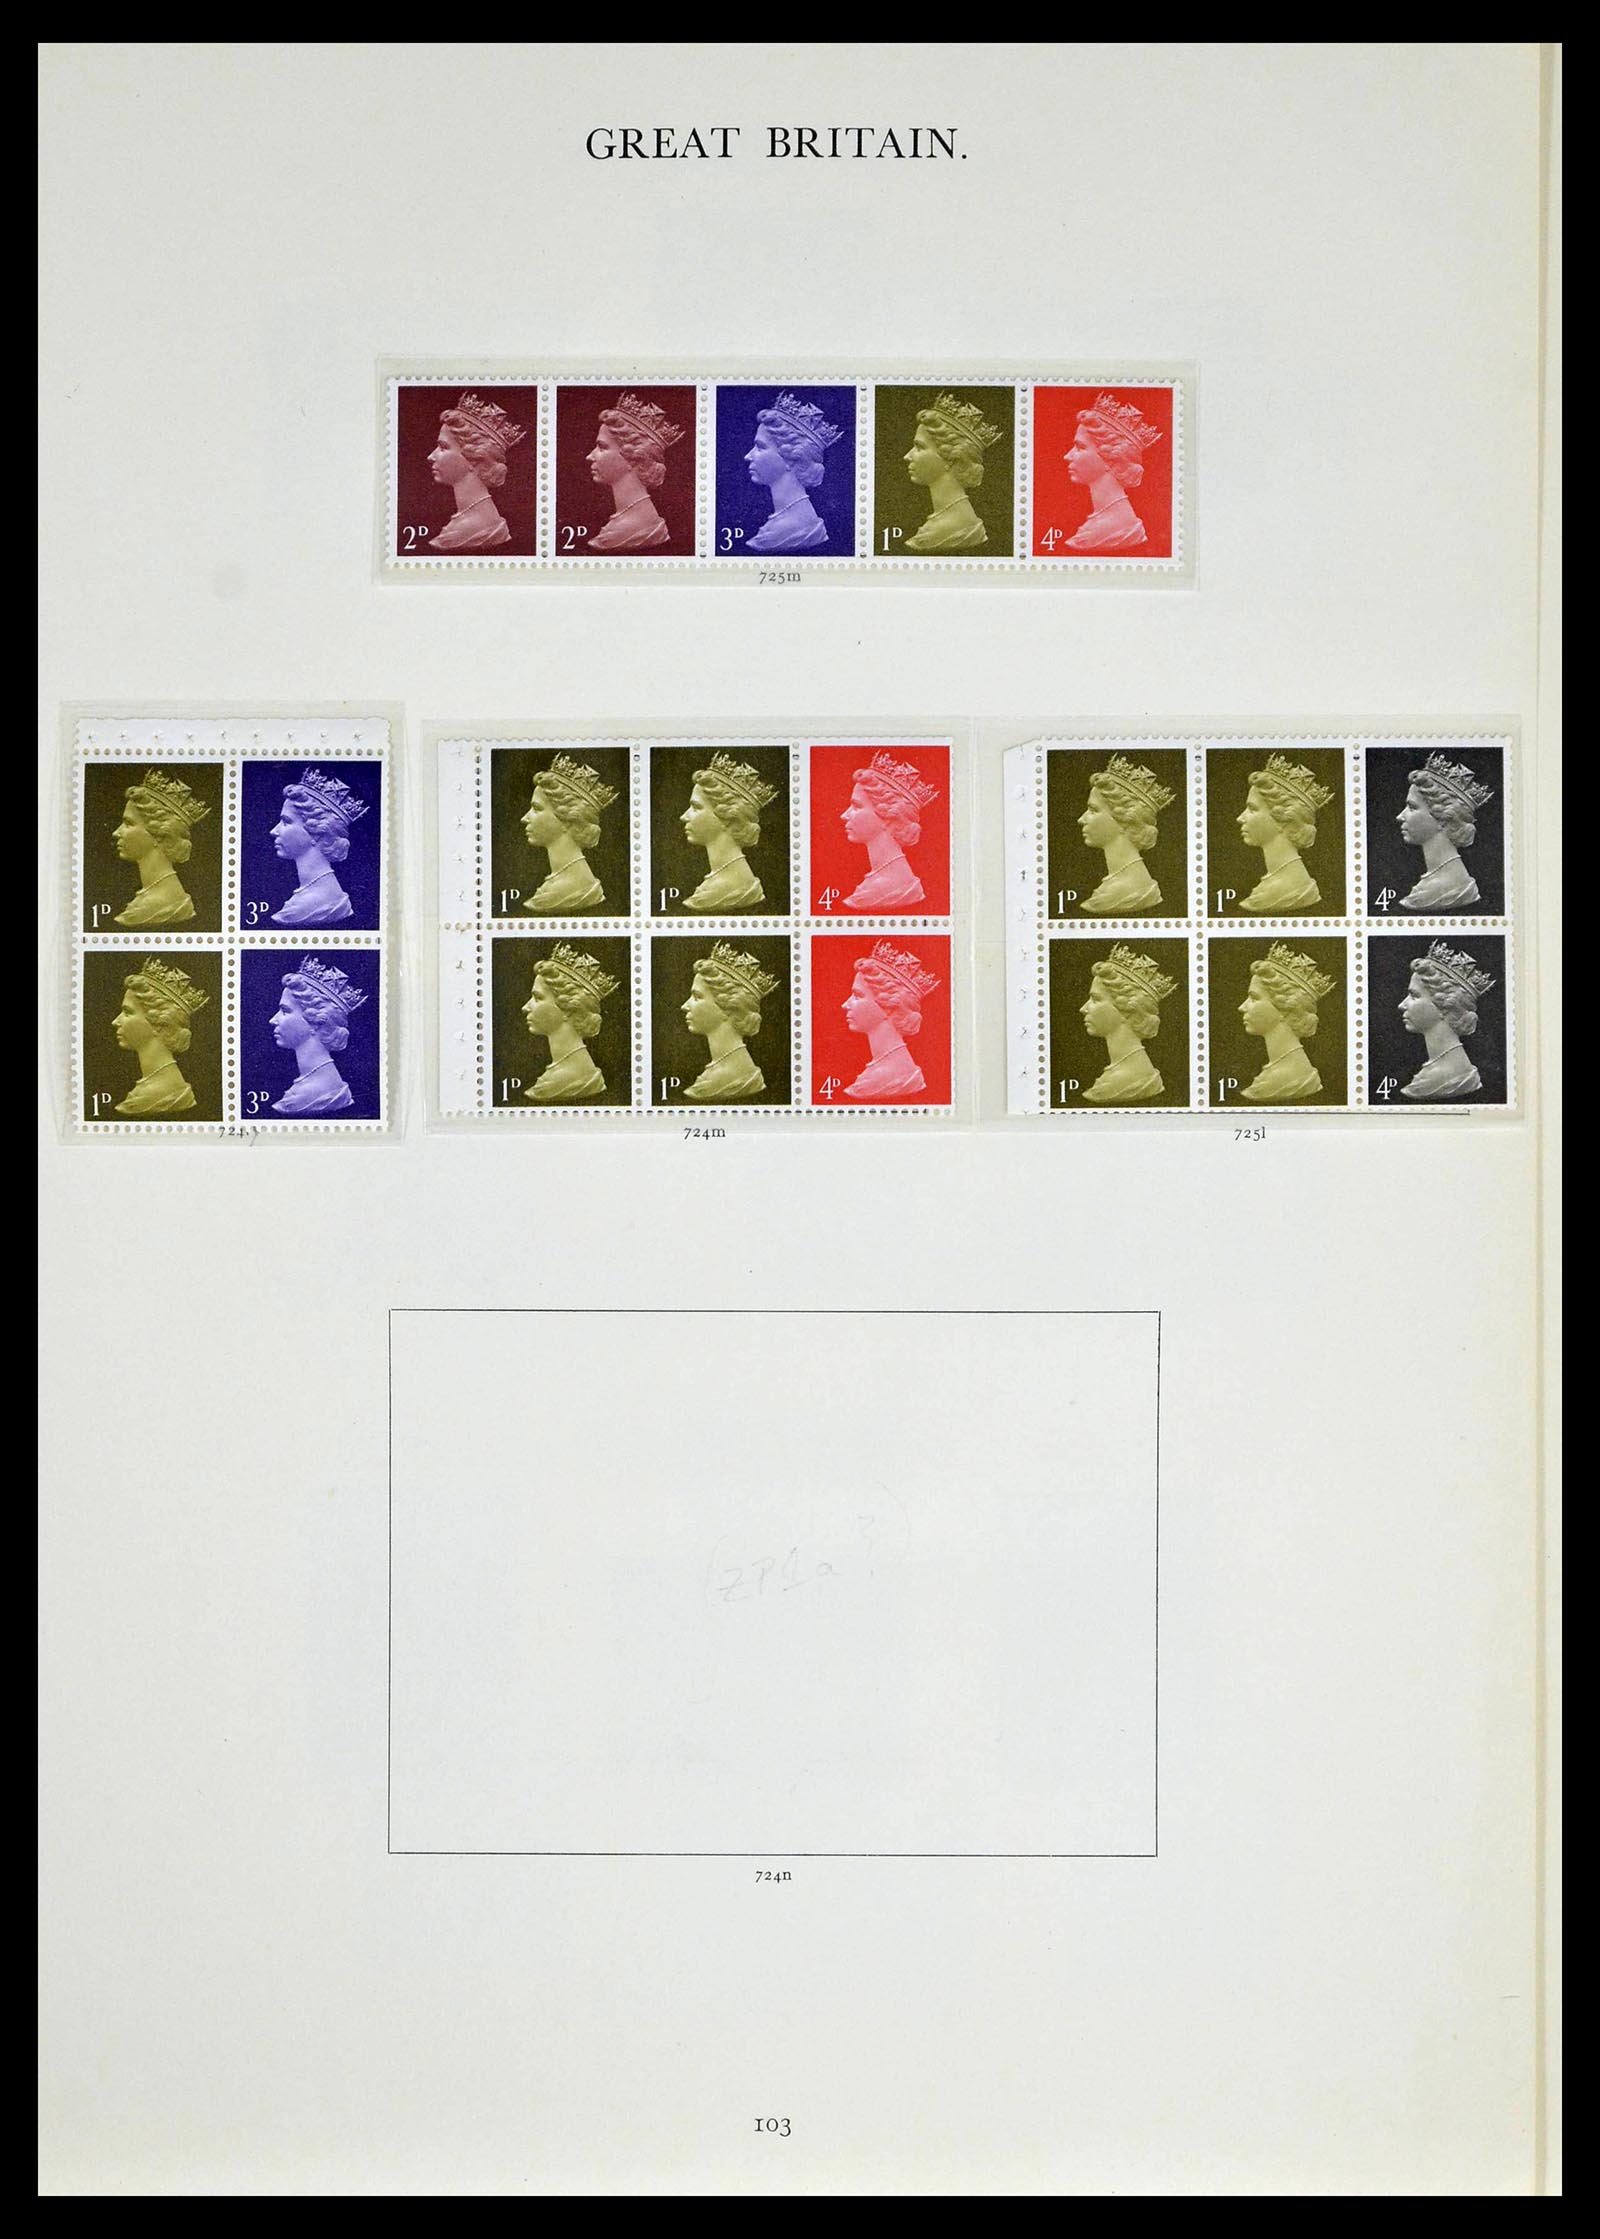 39025 0050 - Stamp collection 39025 Great Britain specialised 1840-1990.